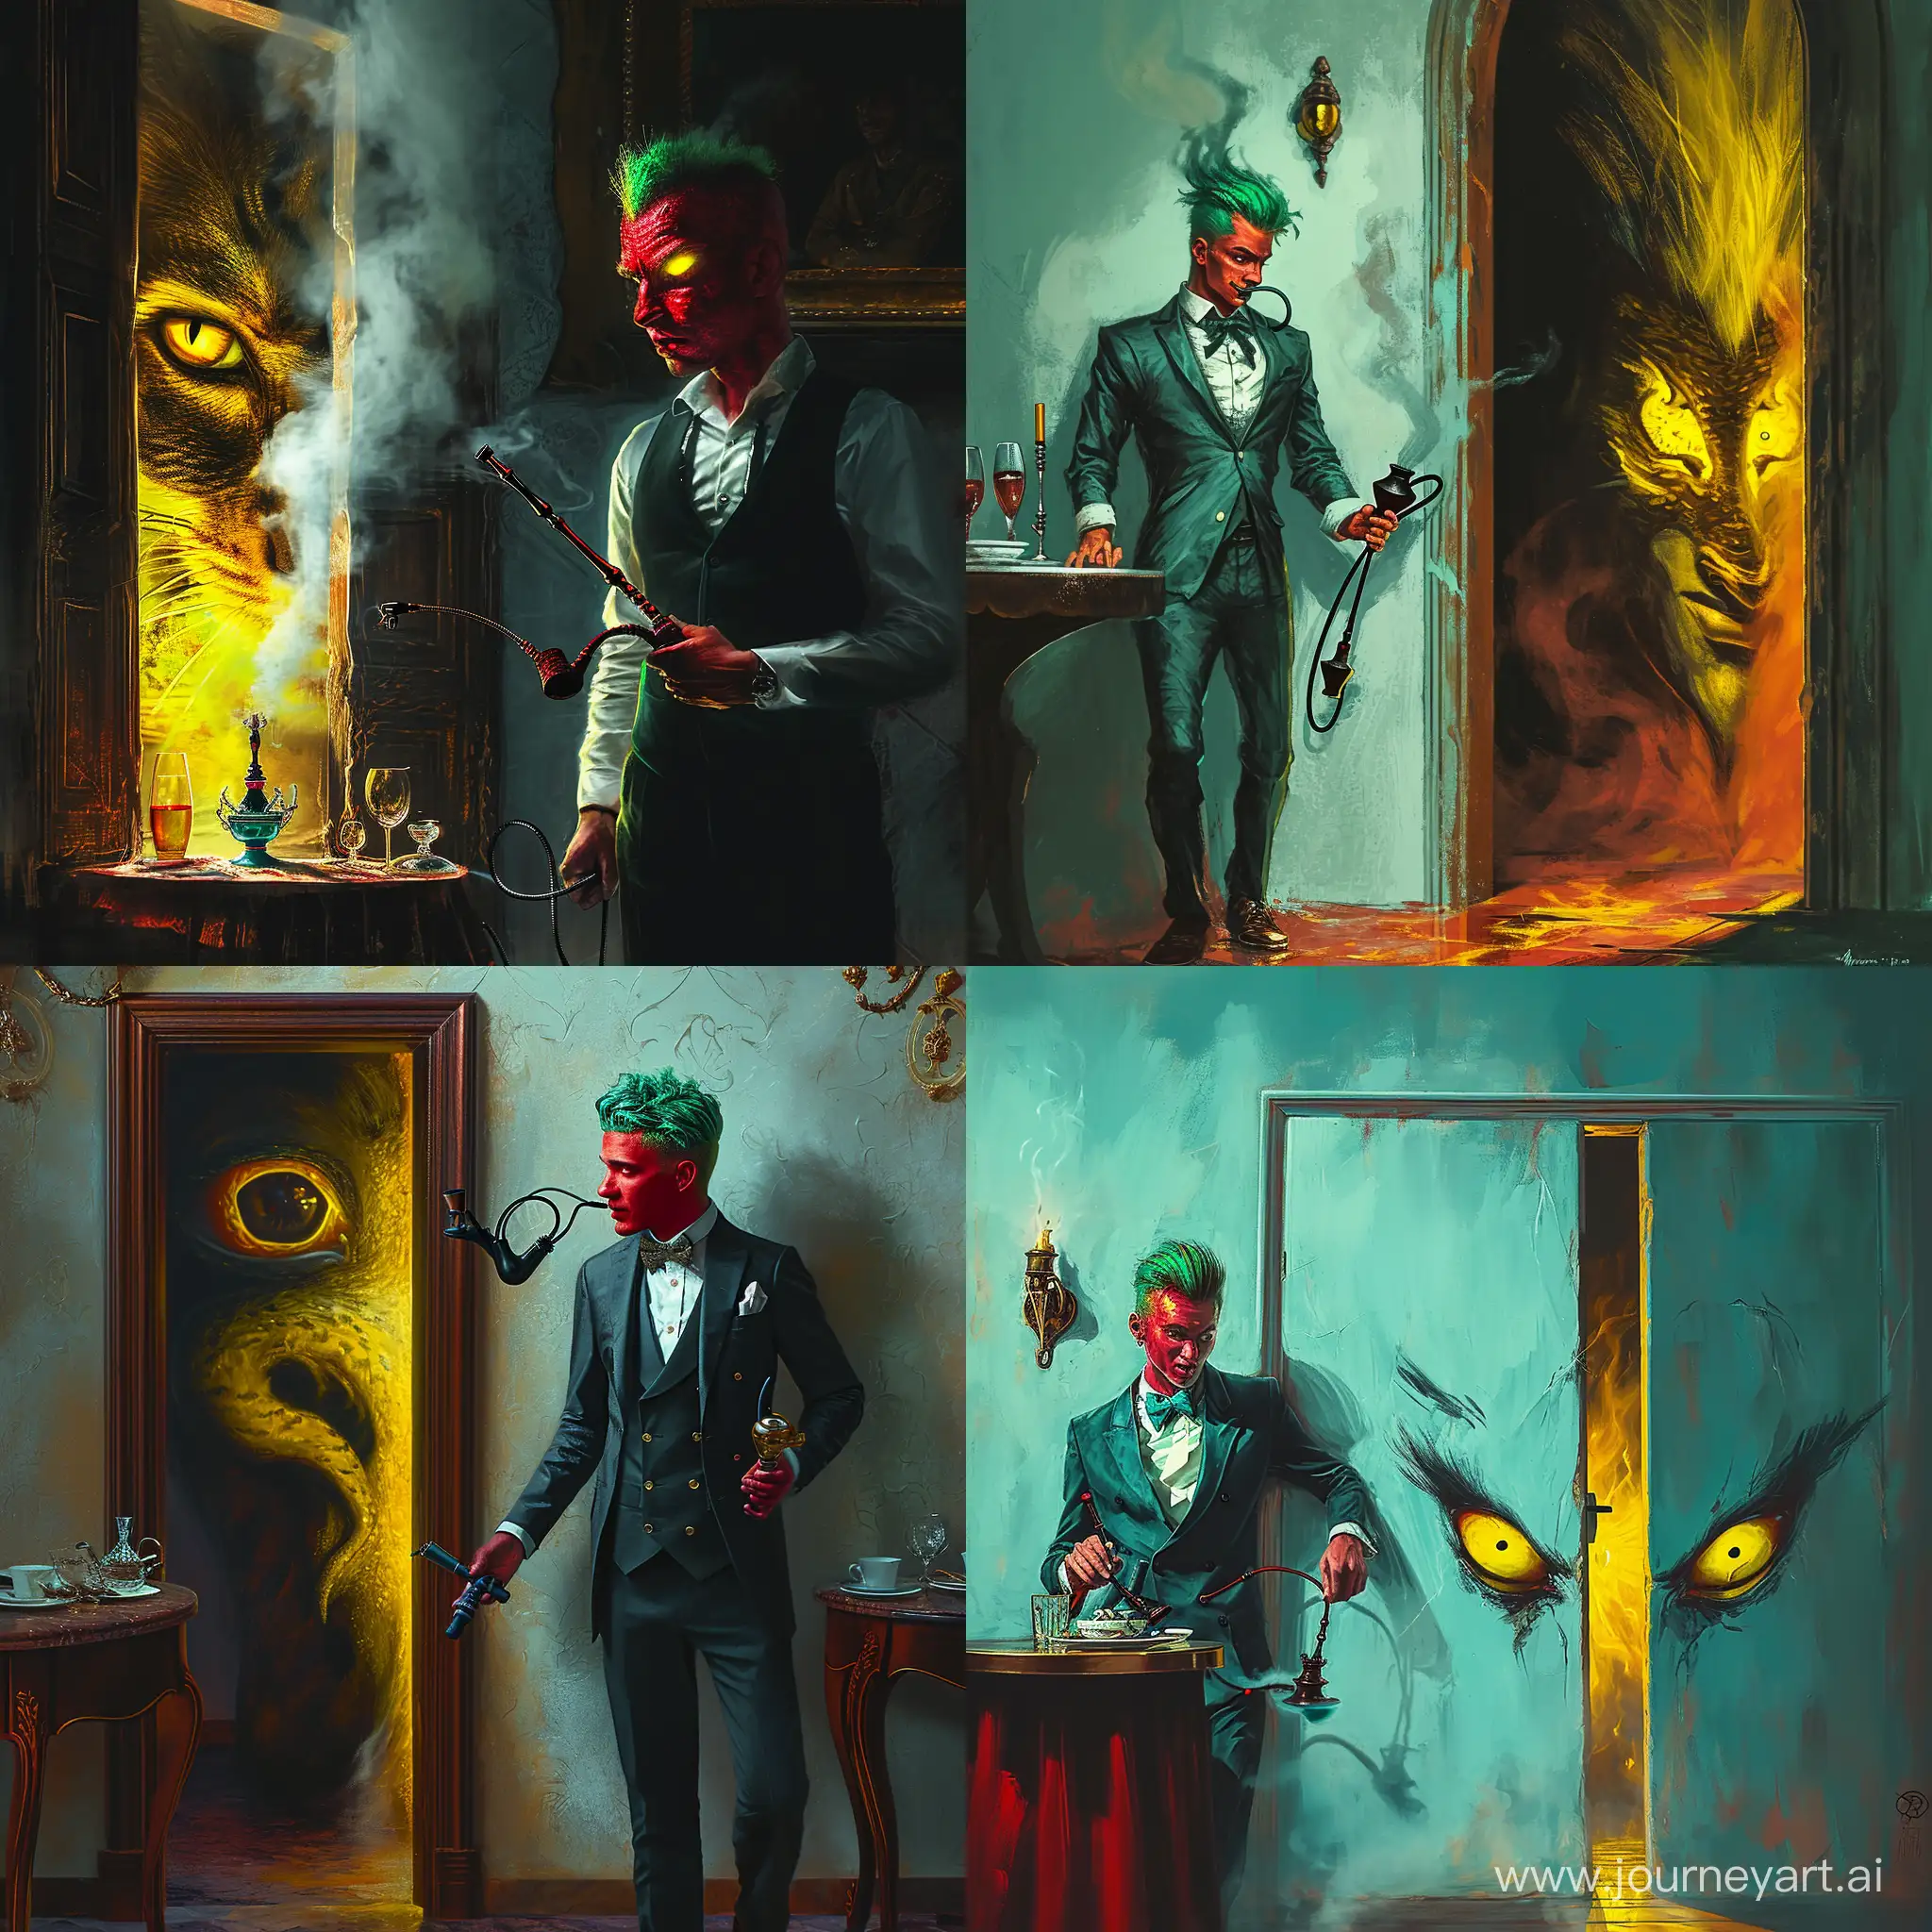 Charming-GreenHaired-Waiter-Discovers-Mysterious-Portal-with-Hookah